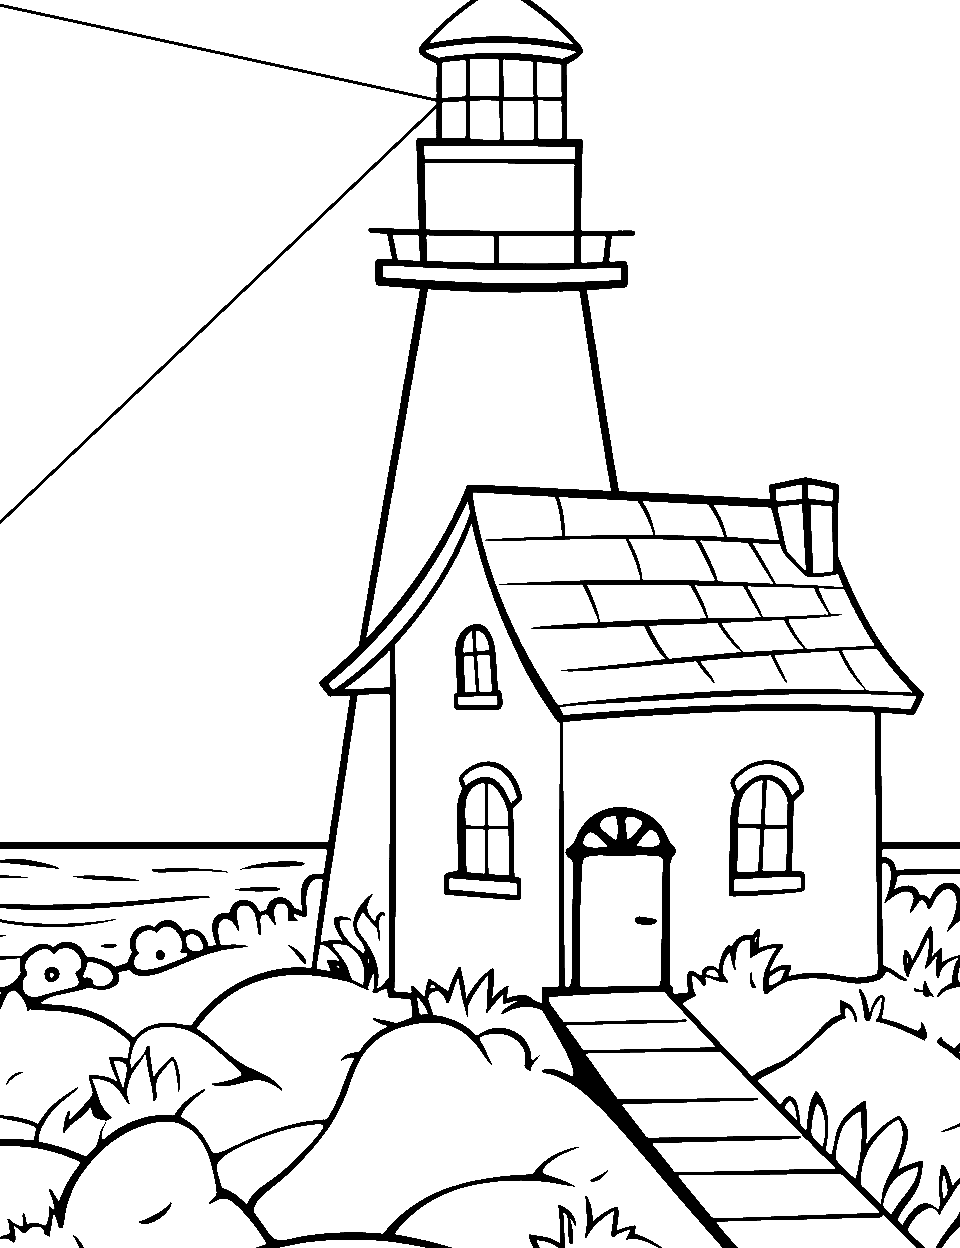 Lofty Lighthouse Living Coloring Page - A lighthouse overlooking the sea.